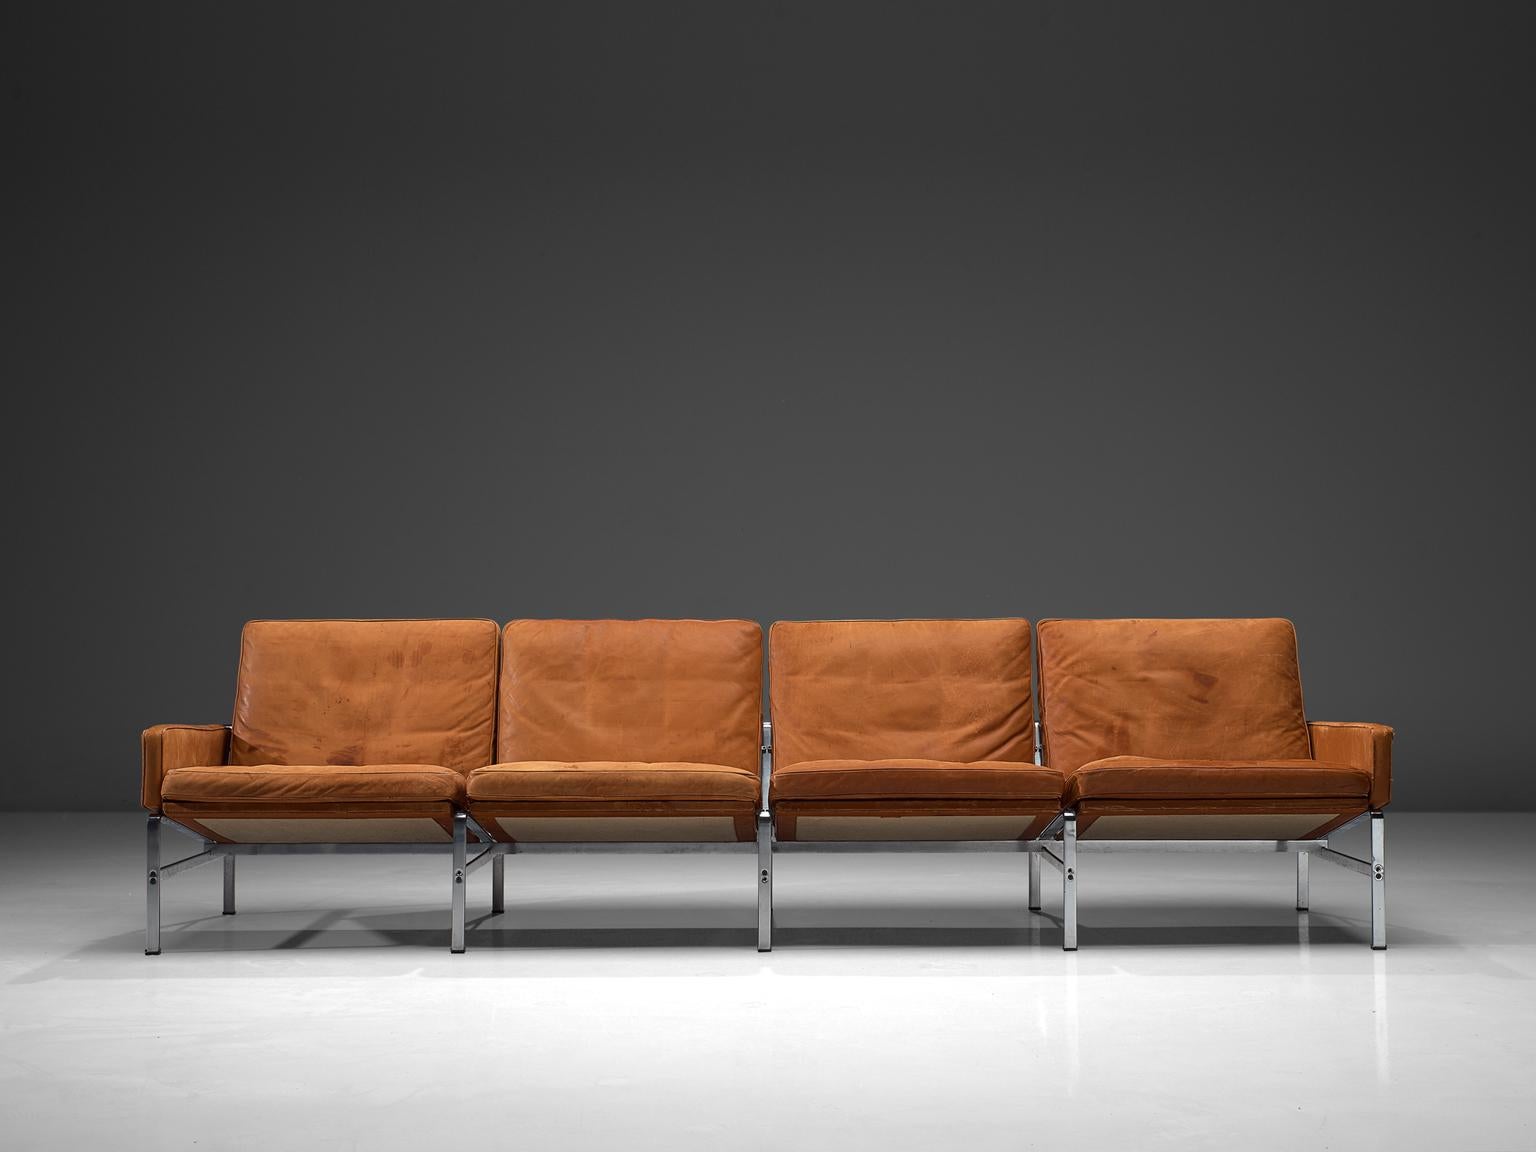 Preben Fabricius & Jørgen Kastholm for Kill International, four-seat sofa, leather and steel, Denmark, circa 1960.

Large sofa in patinated cognac leather by Fabricius and Kastholm. The base of this sofa gives a characteristic and open character.